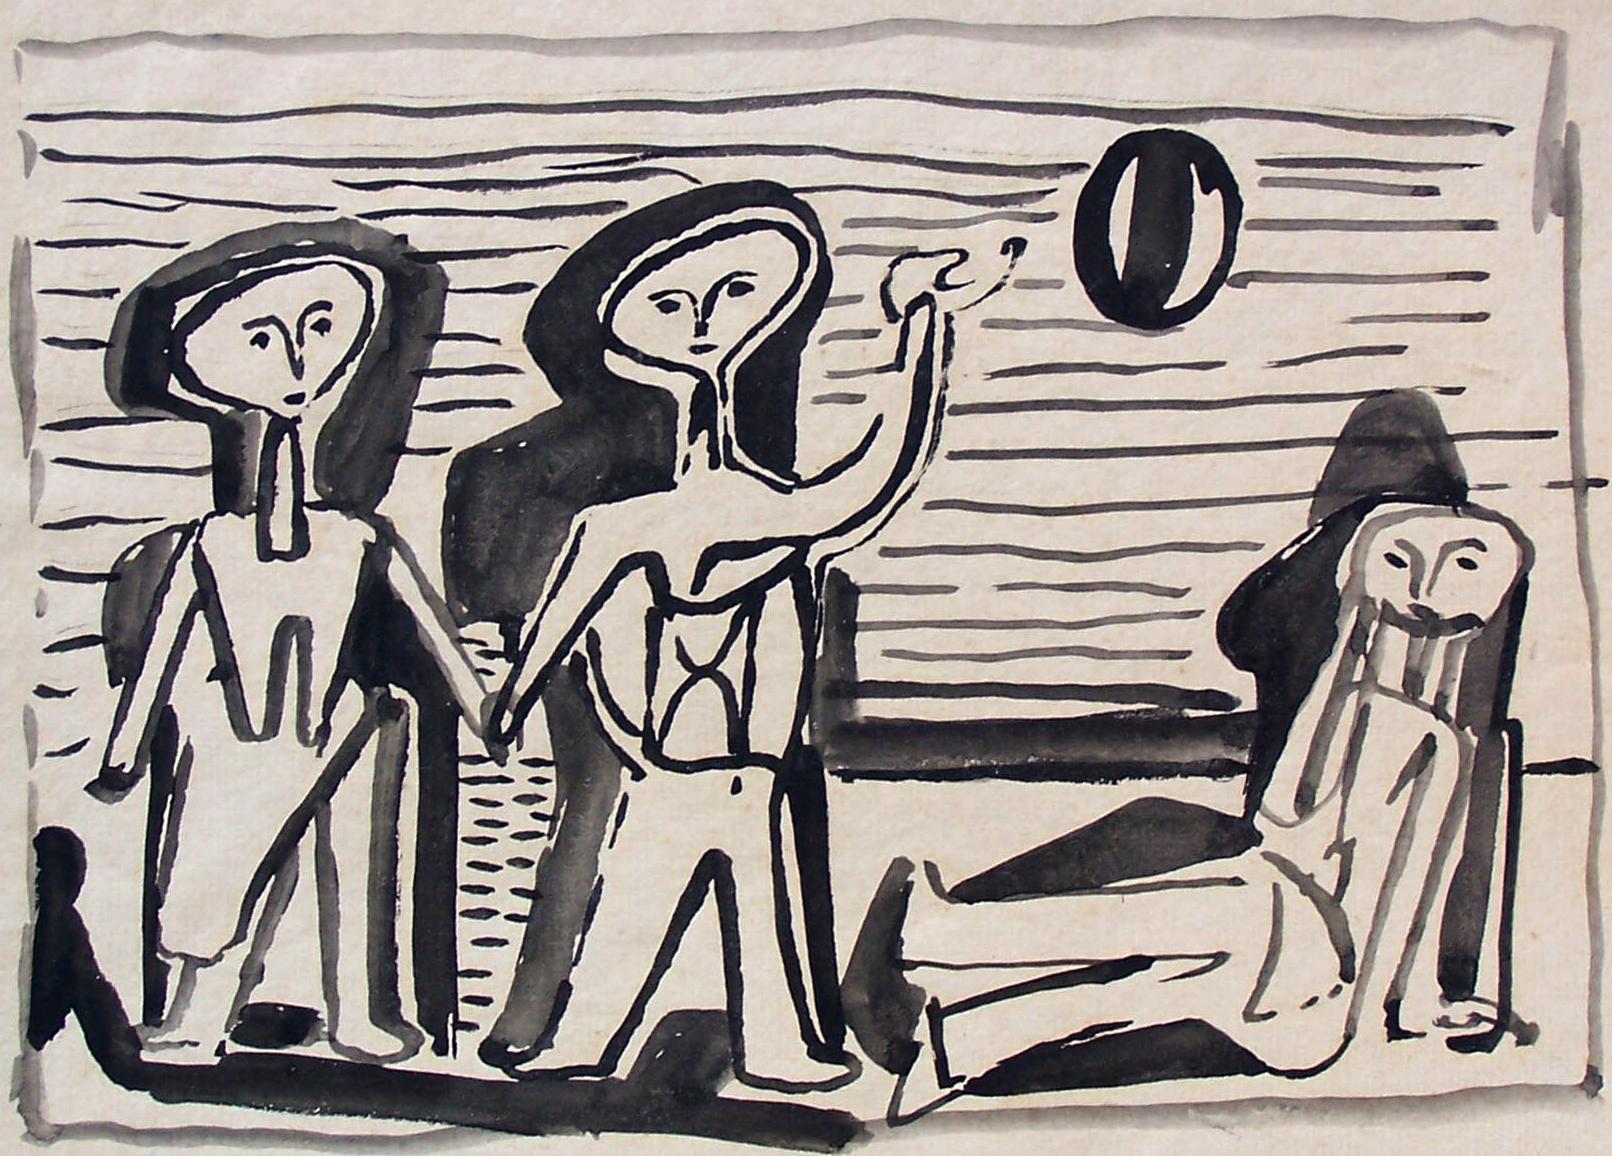 Jankel Adler Figurative Art - Bathers Playing with a Ball at the Beach - Polish Art British German